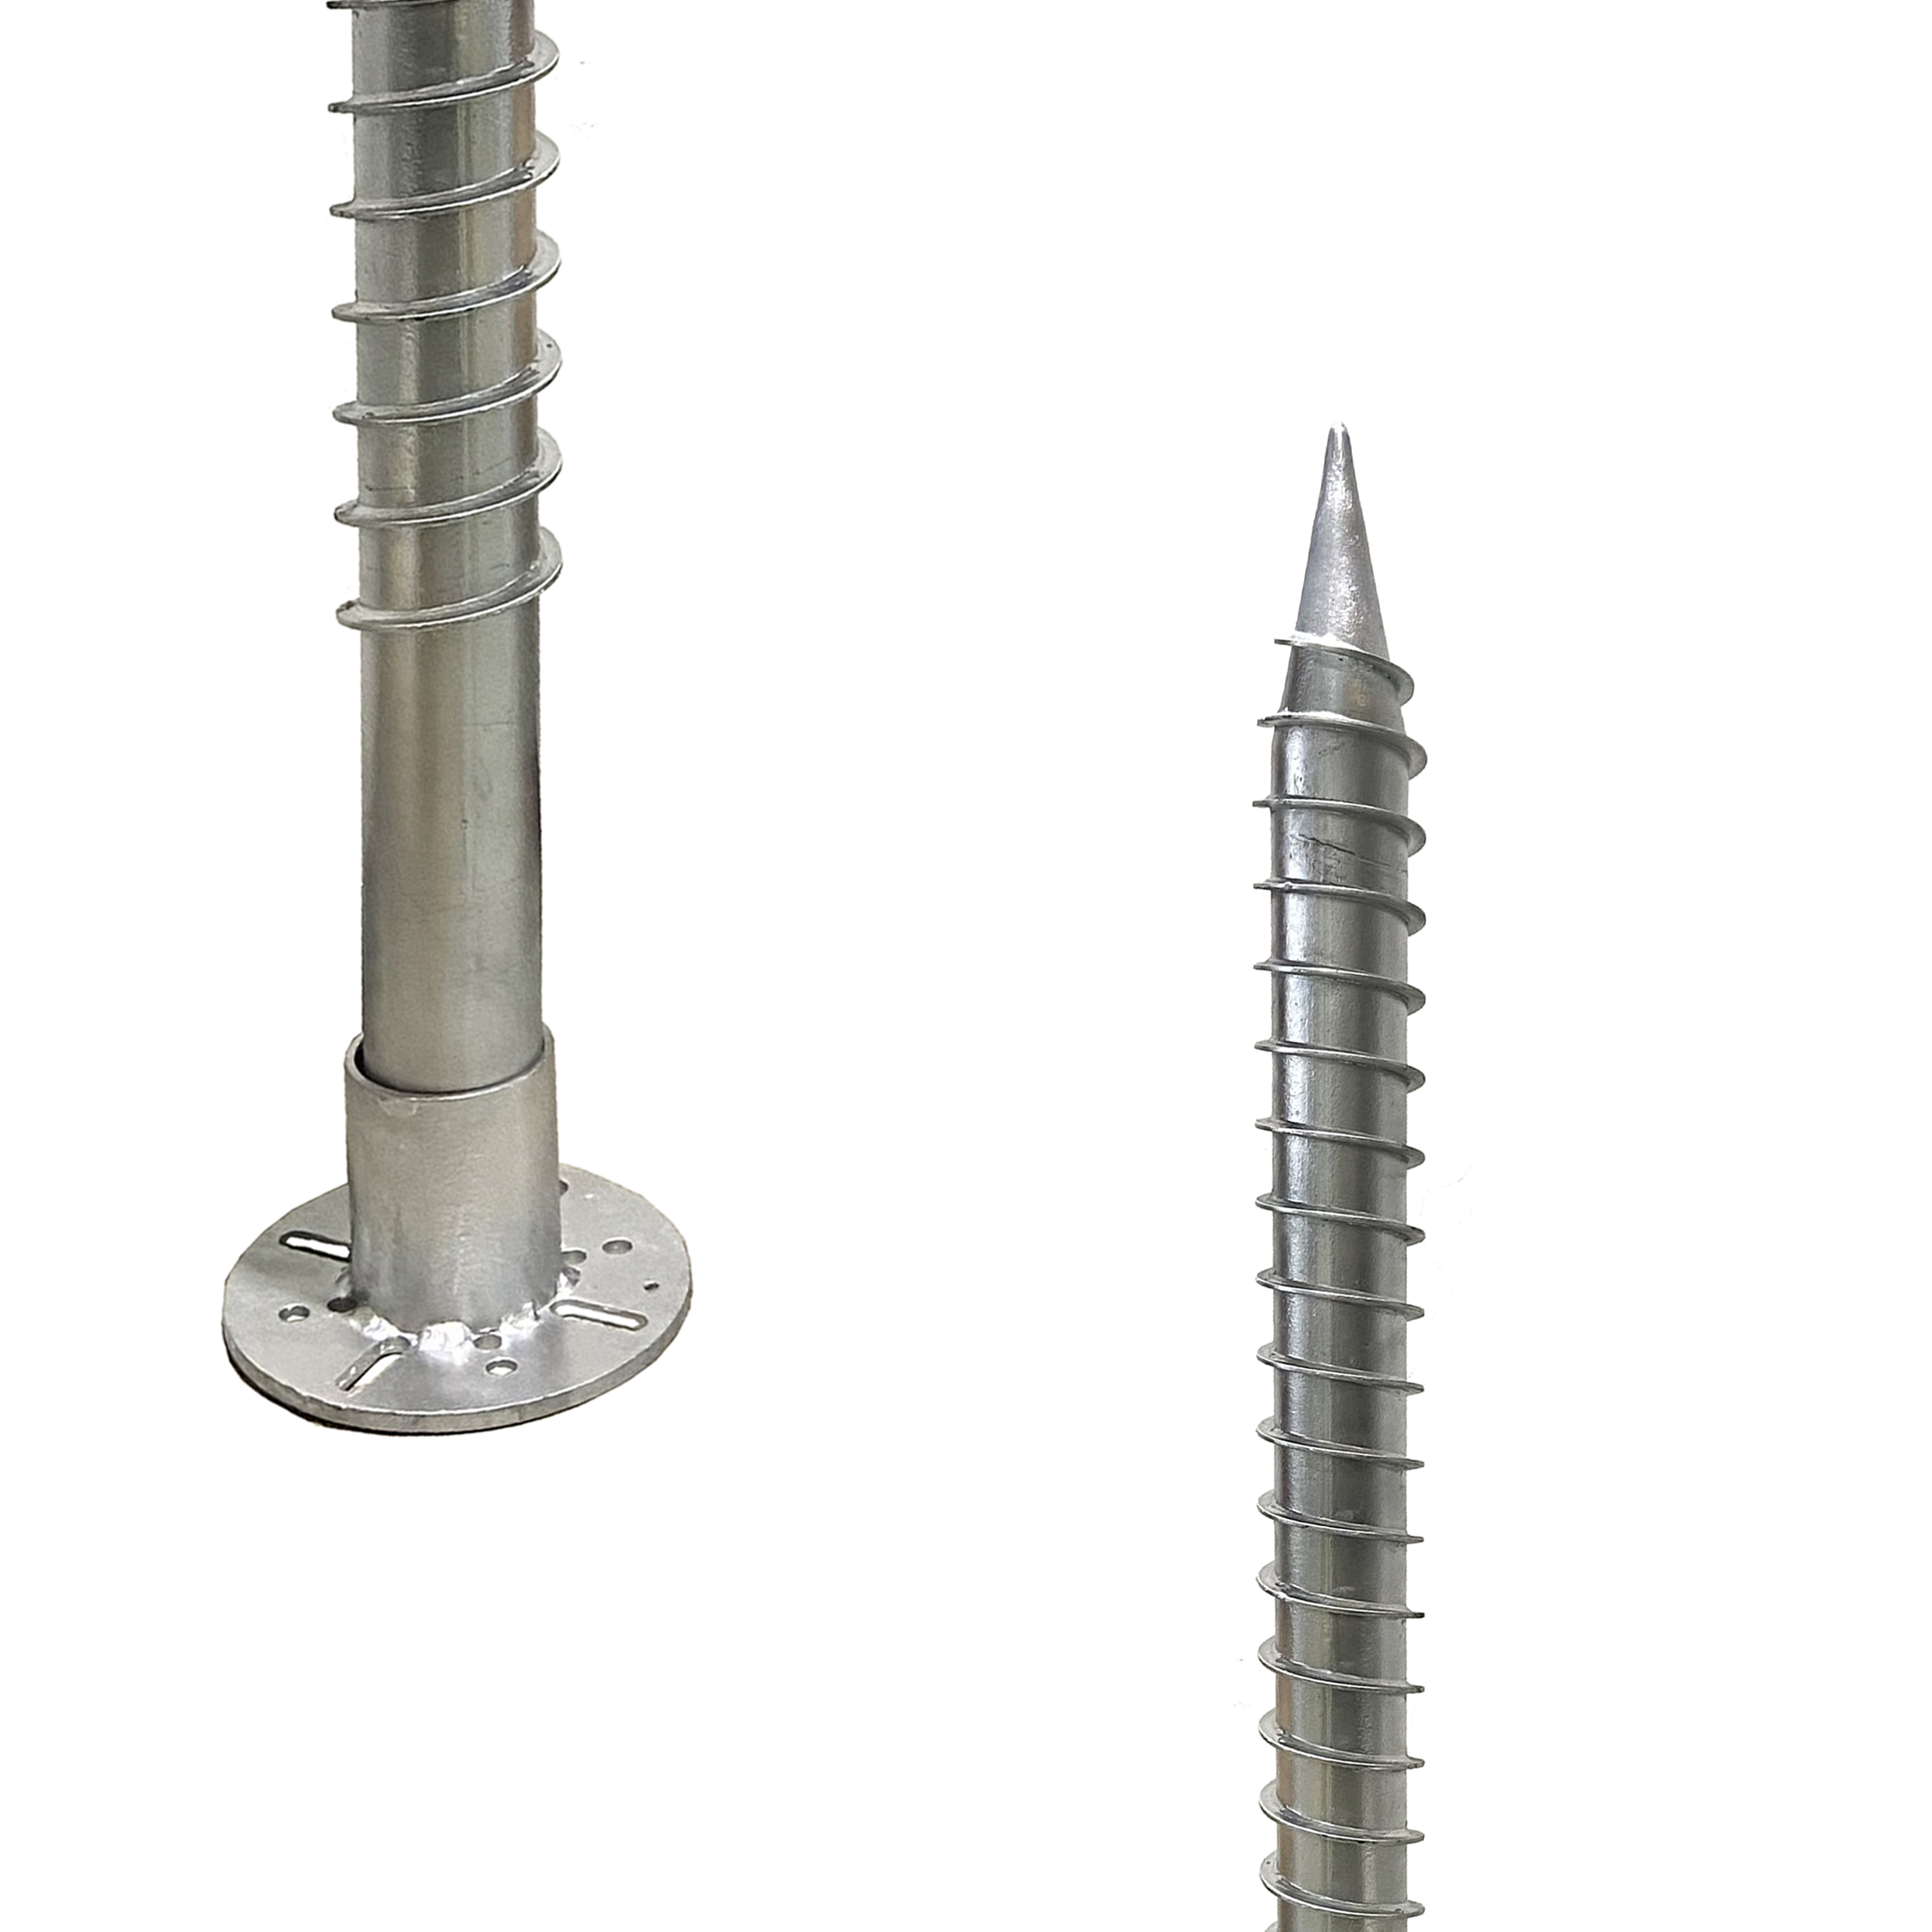 Hot DIP Galvanized Carbon Steel Customized Photovoltaic Pile Ground Screw for Solar System